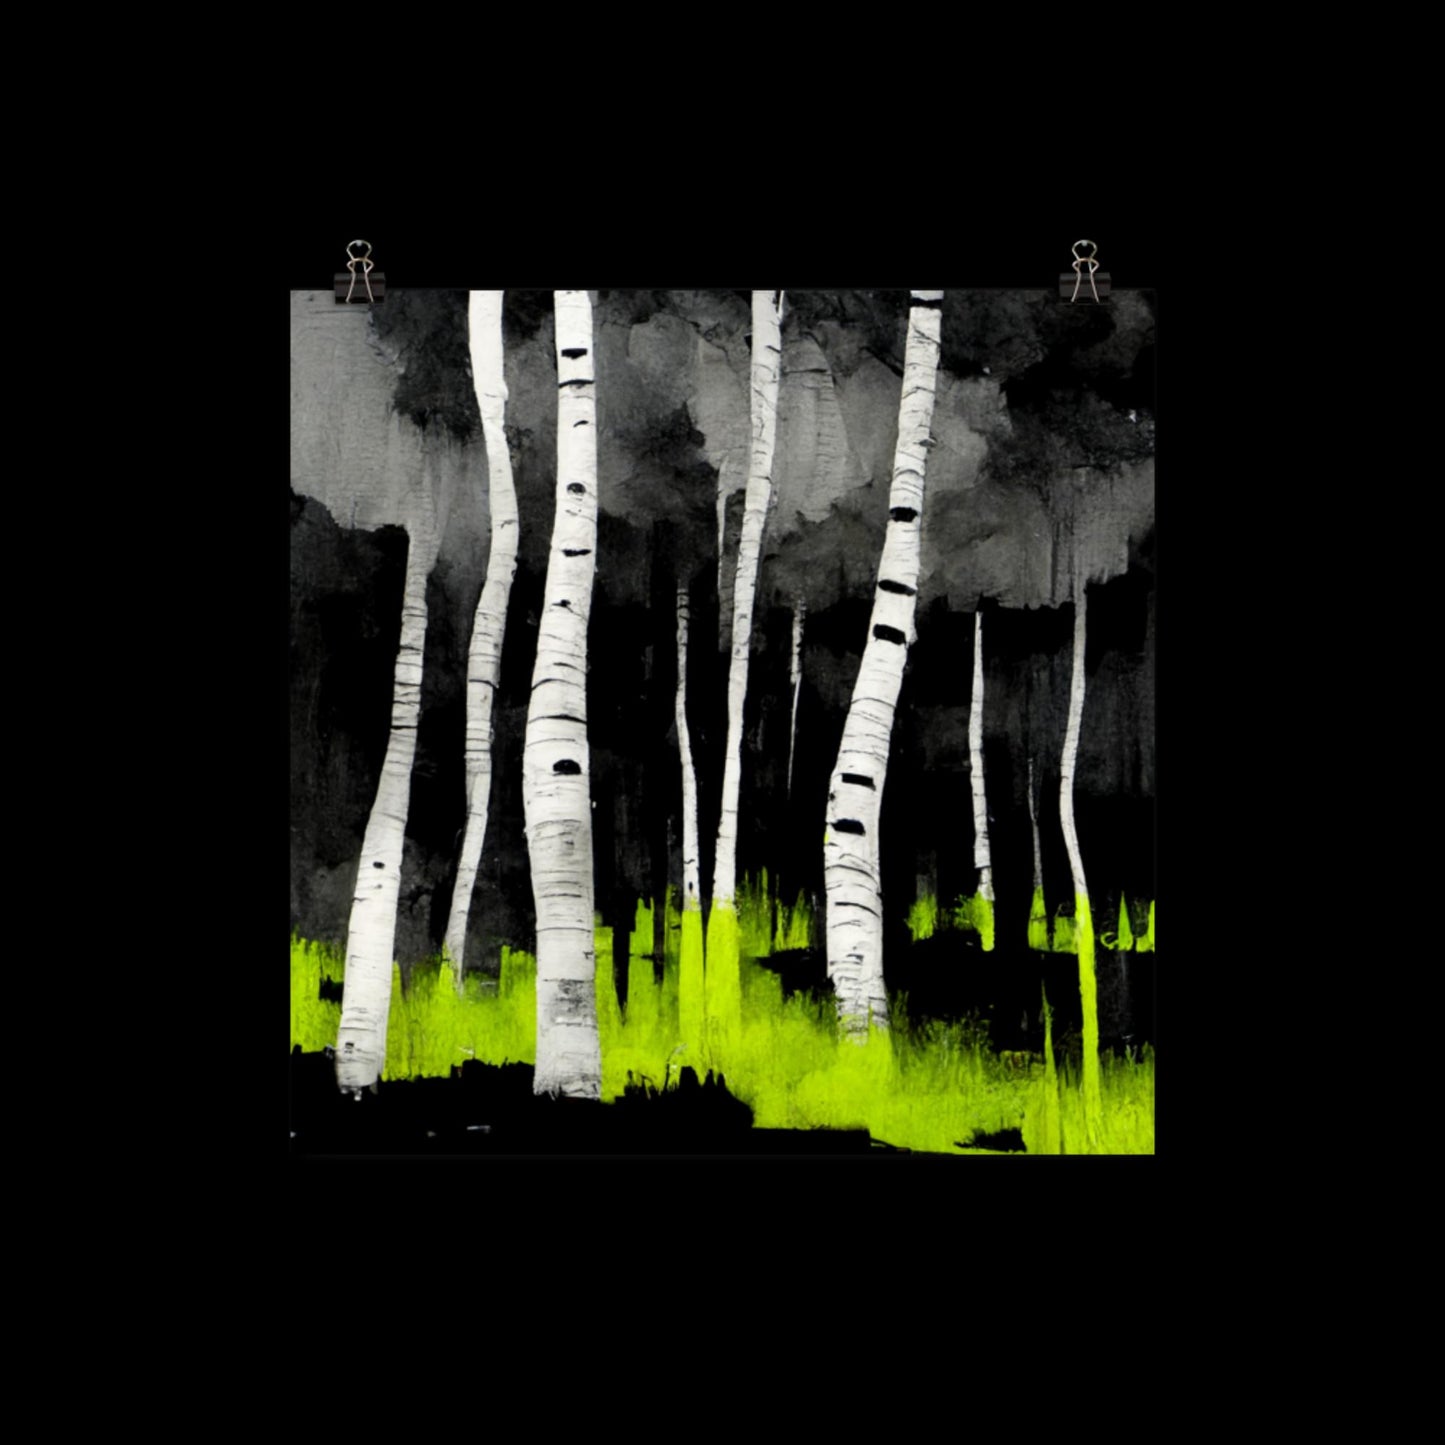 Toxic Birch Forest Poster Print